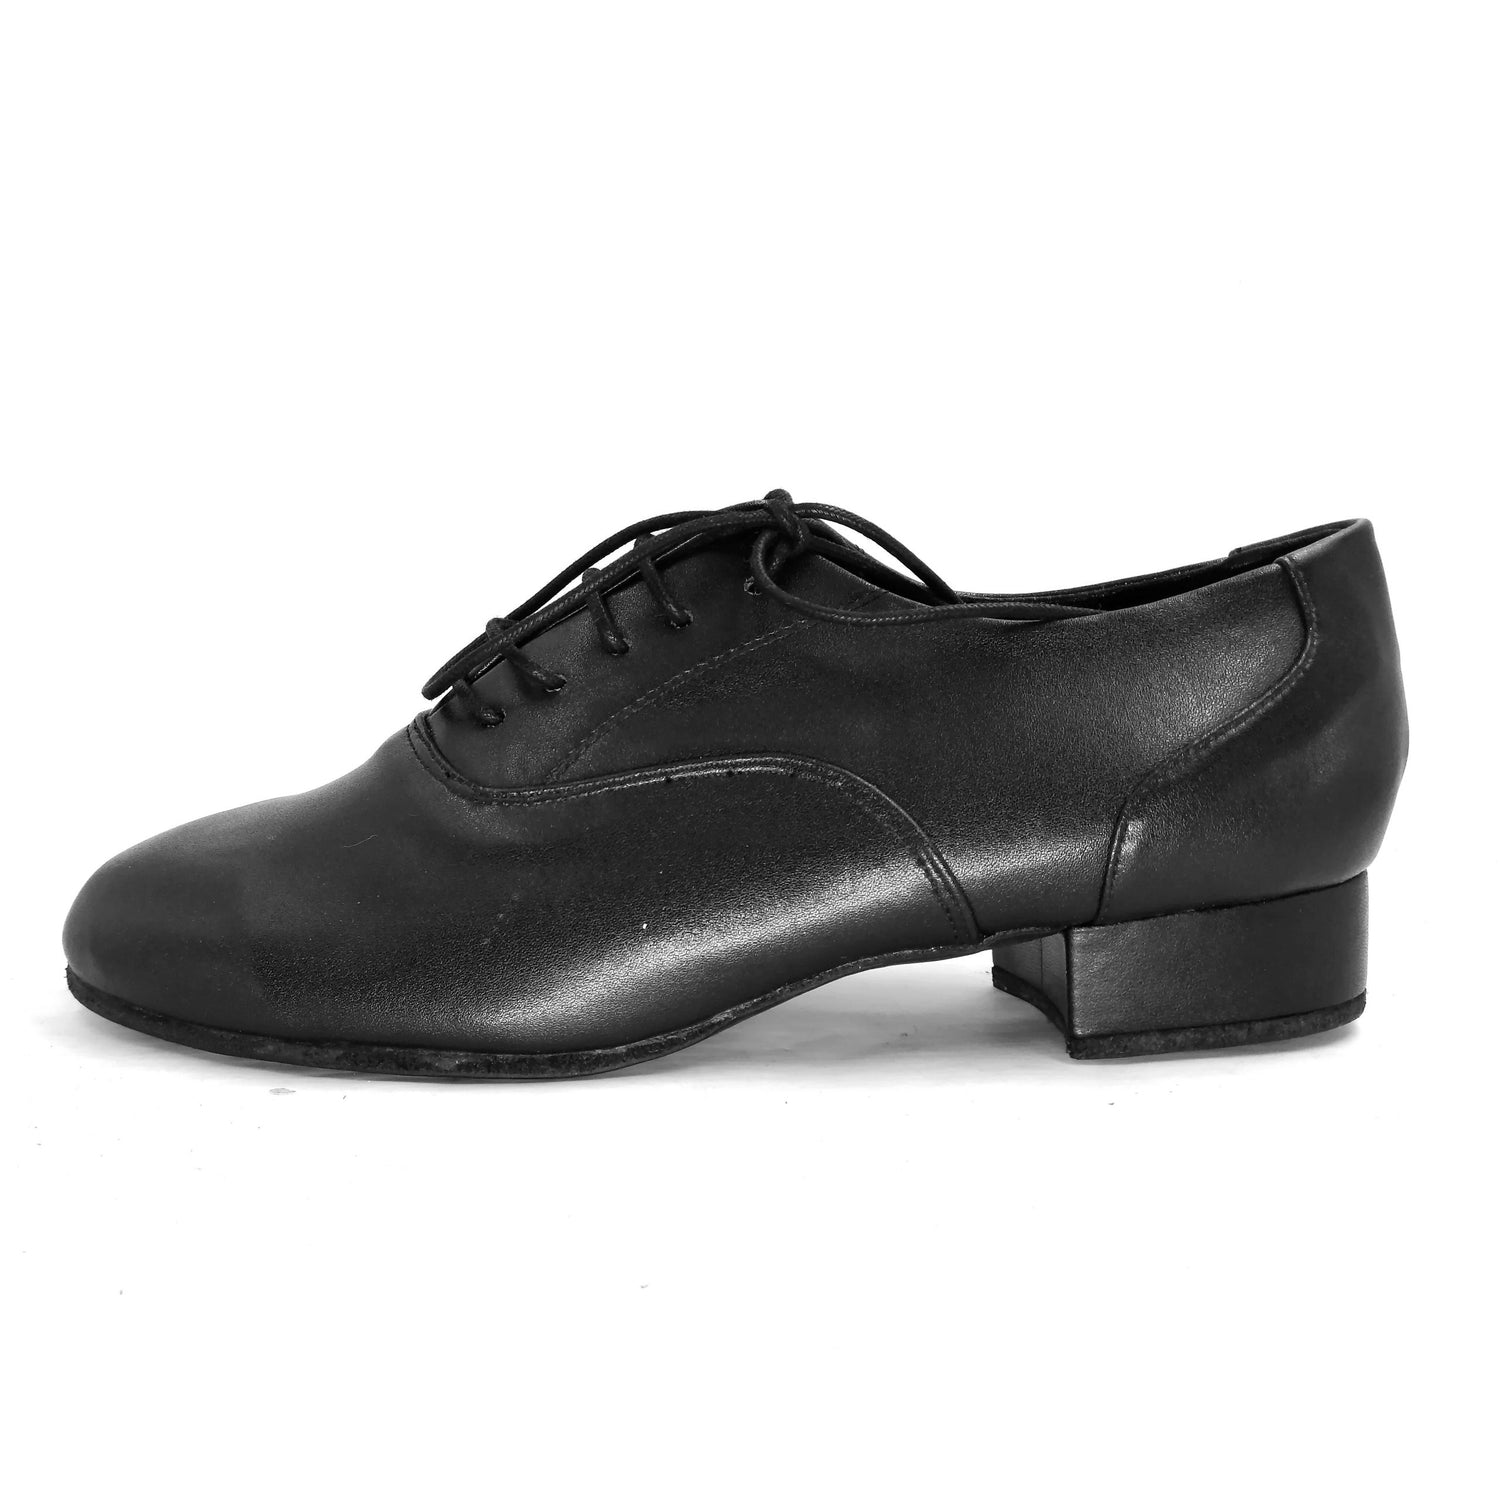 Pro Dancer Men's Tango Shoes with 1 inch Heel Leather Lace-up in Black4